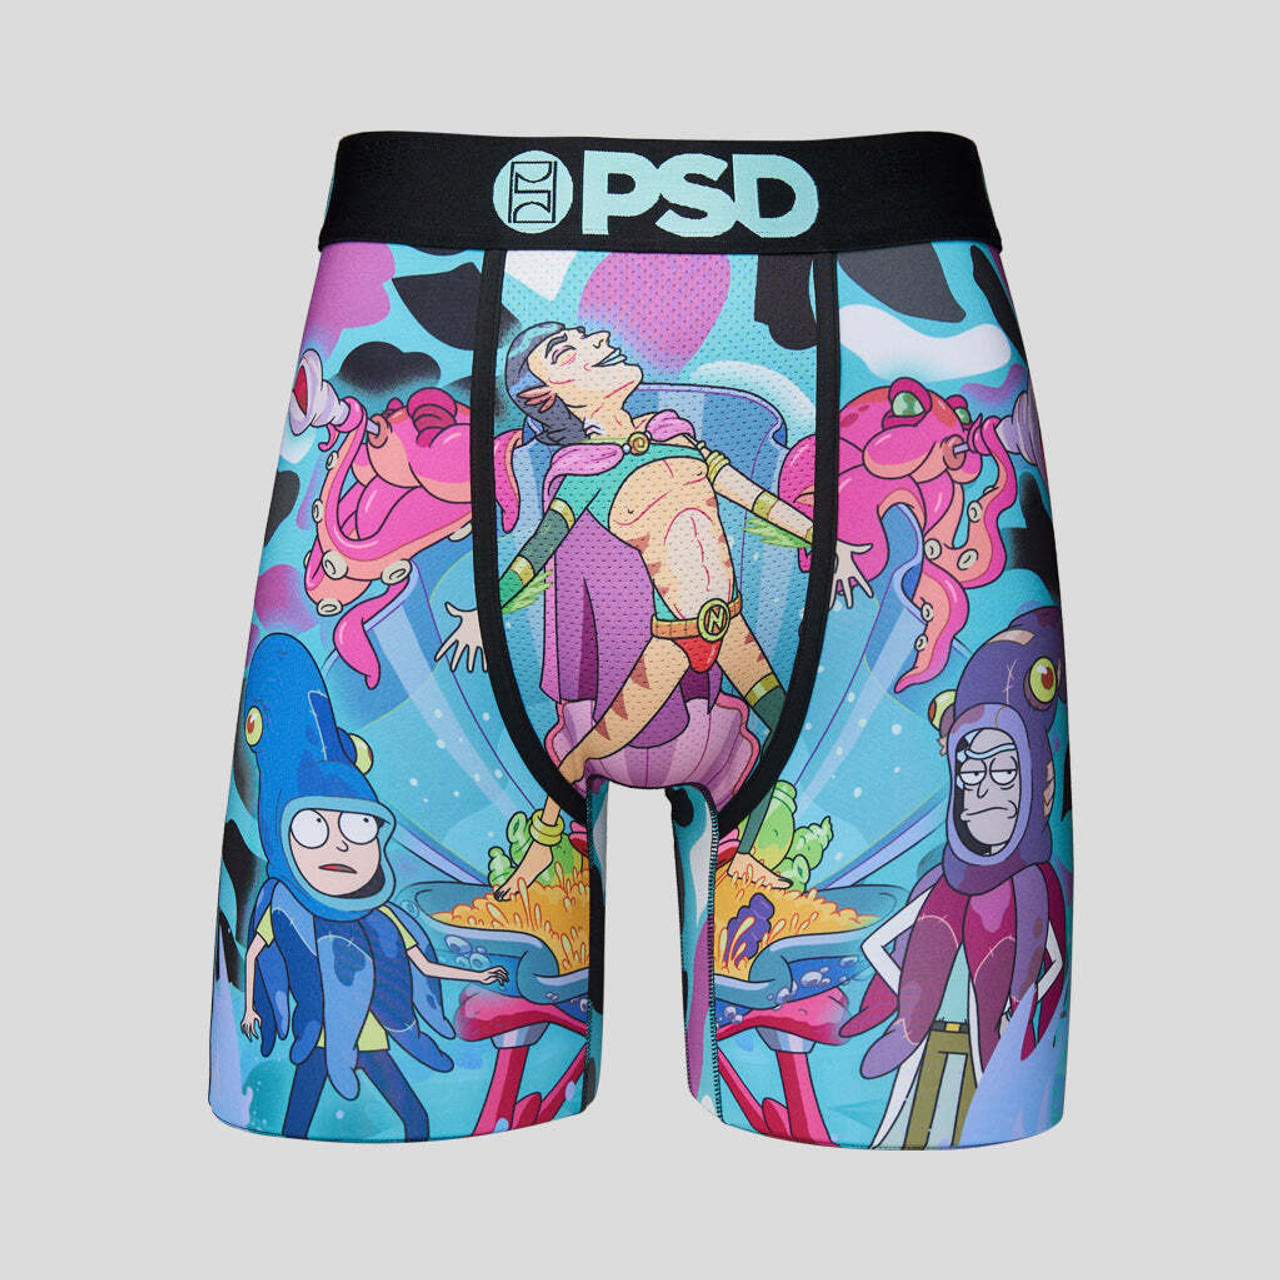 PSD Rick and Morty I Am Mr. Nimbus Animated Underwear Boxer Briefs  222180034 - Fearless Apparel